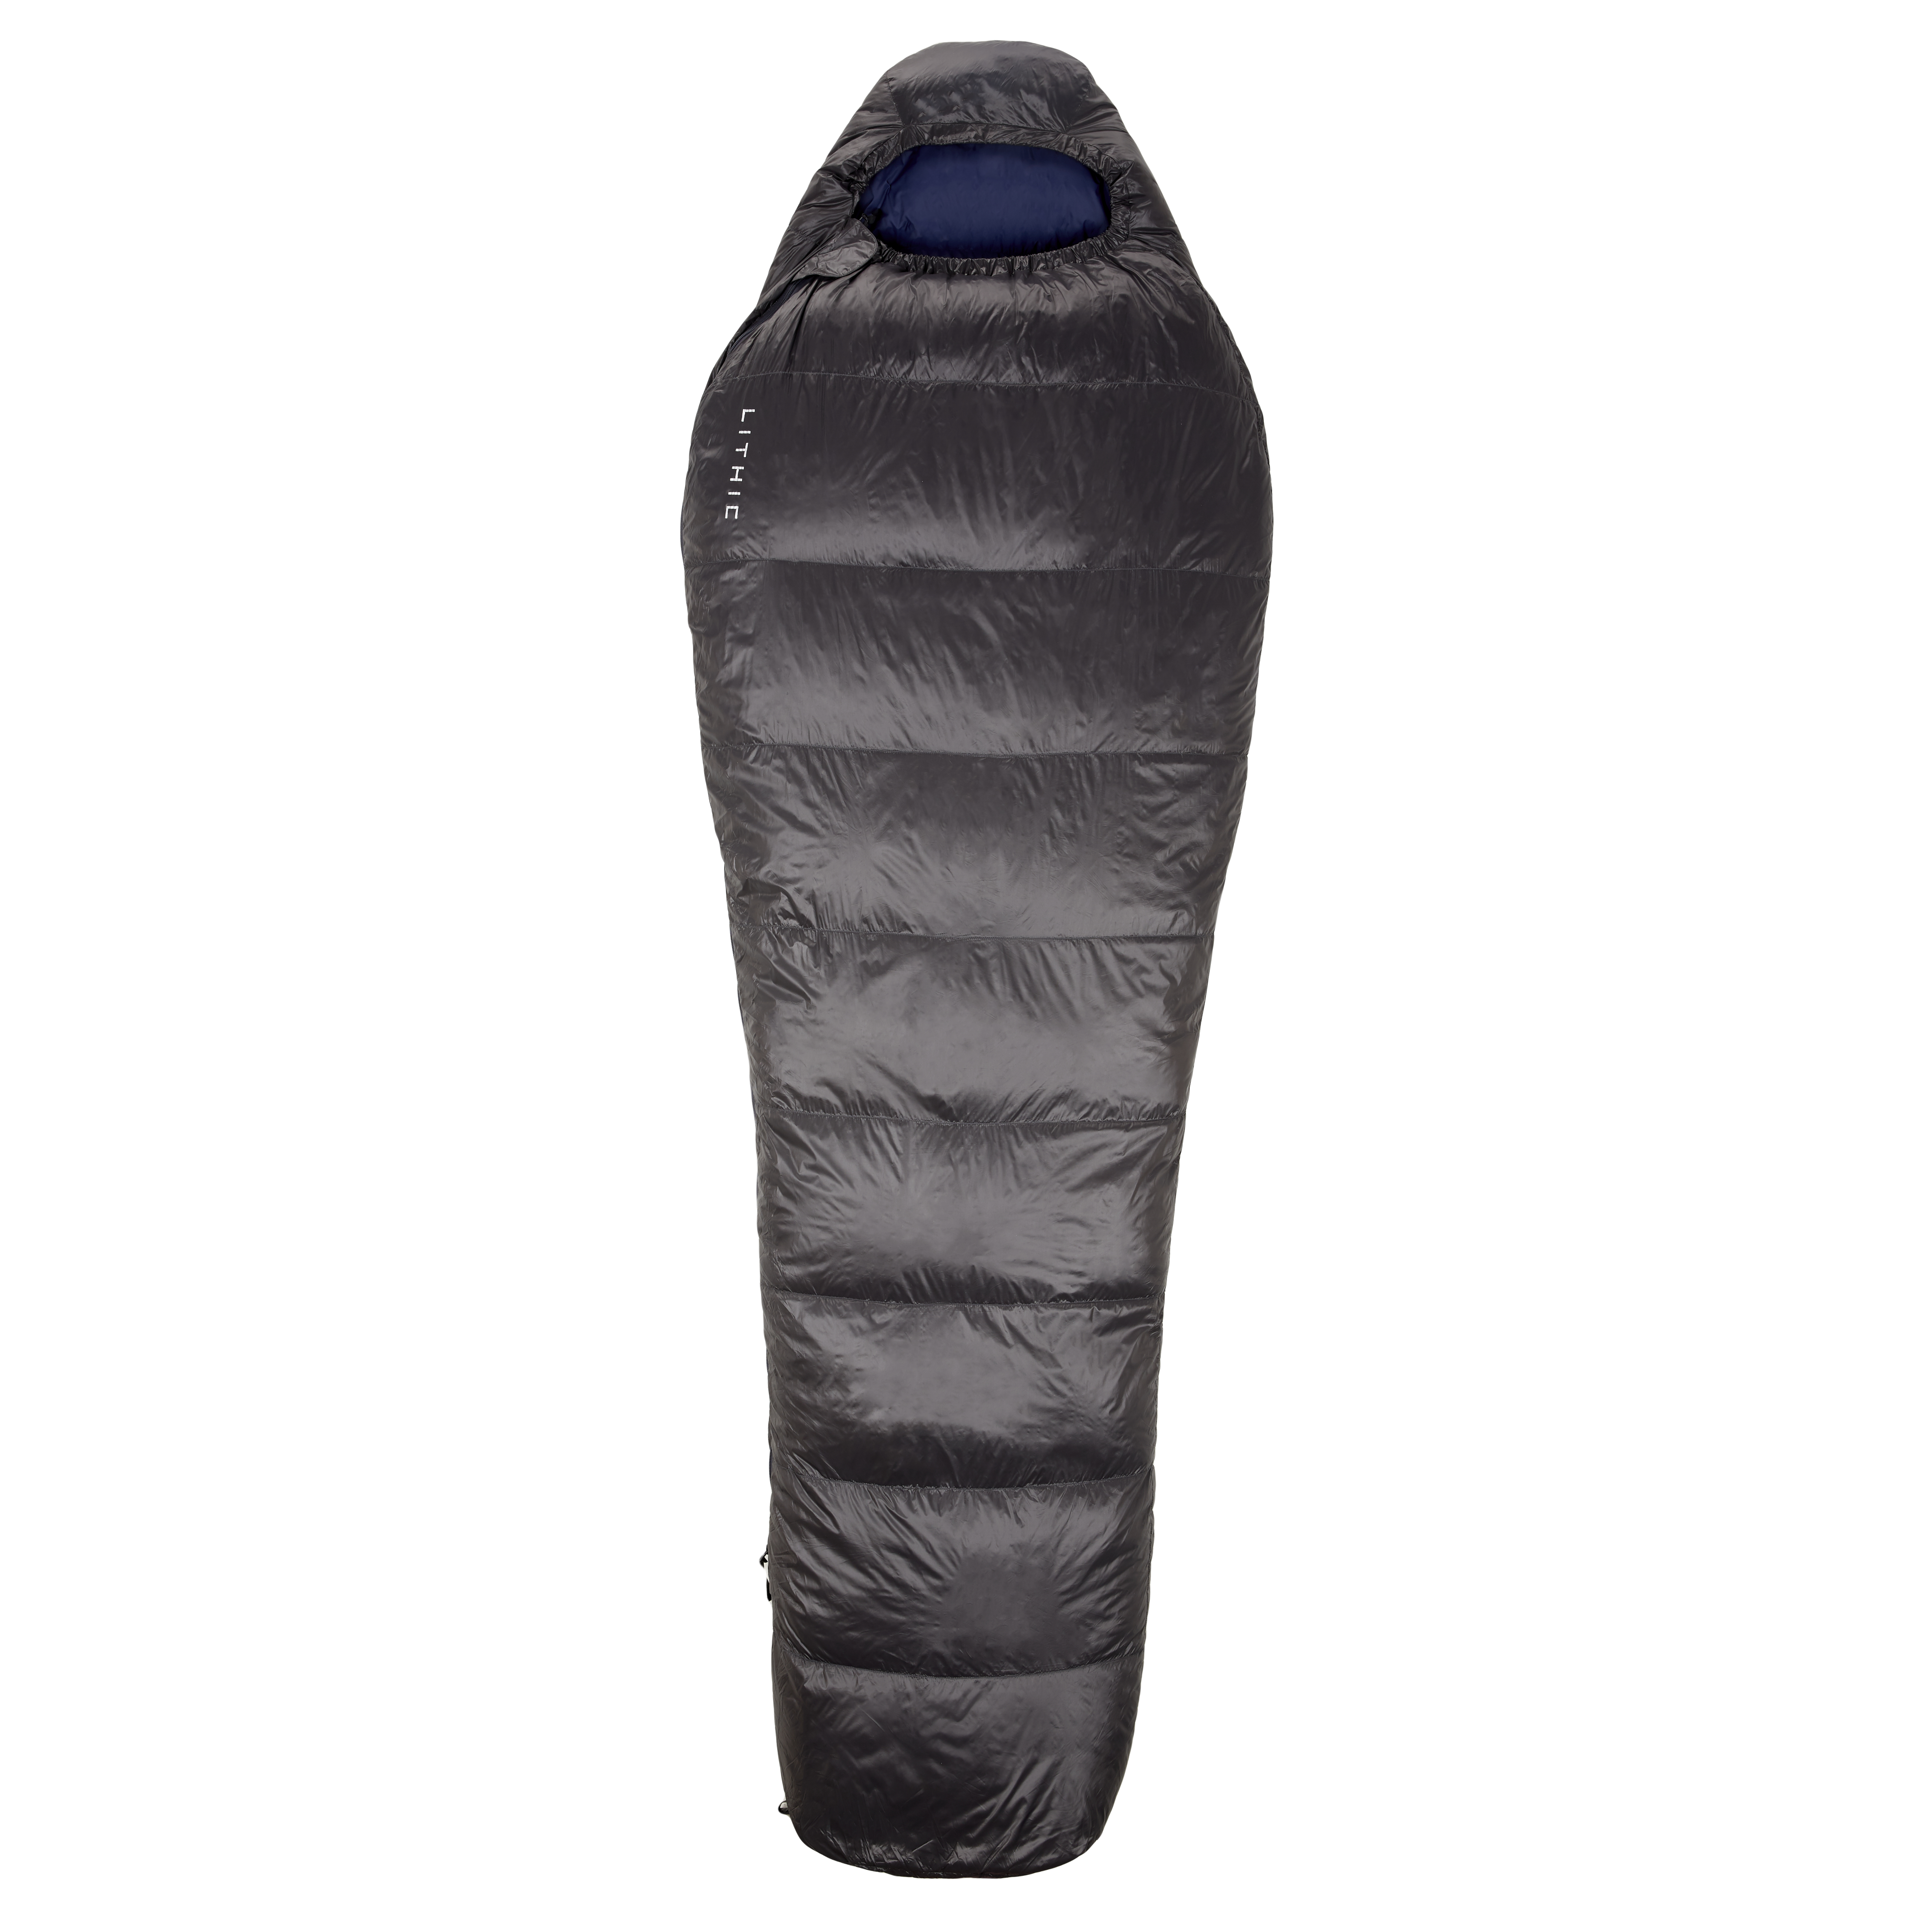 LITHIC 35-Degree Down Sleeping Bag - image 1 of 8